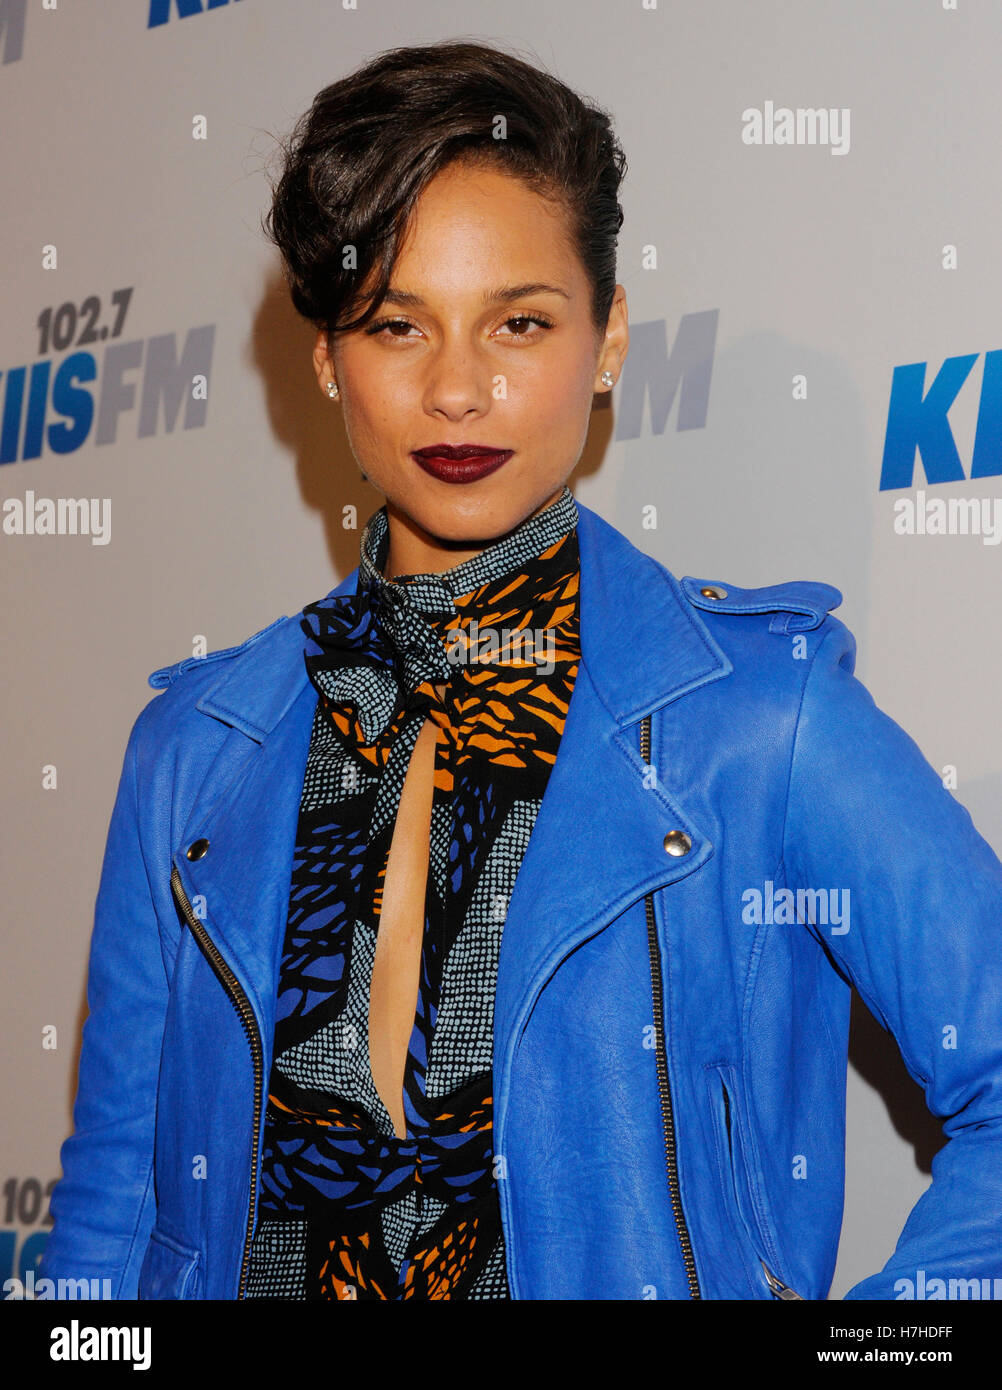 Singer Alicia Keys arrives at KIIS FM's 2012 Jingle Ball at Nokia Theatre L.A. Live on December 3, 2012 in Los Angeles, California. Stock Photo